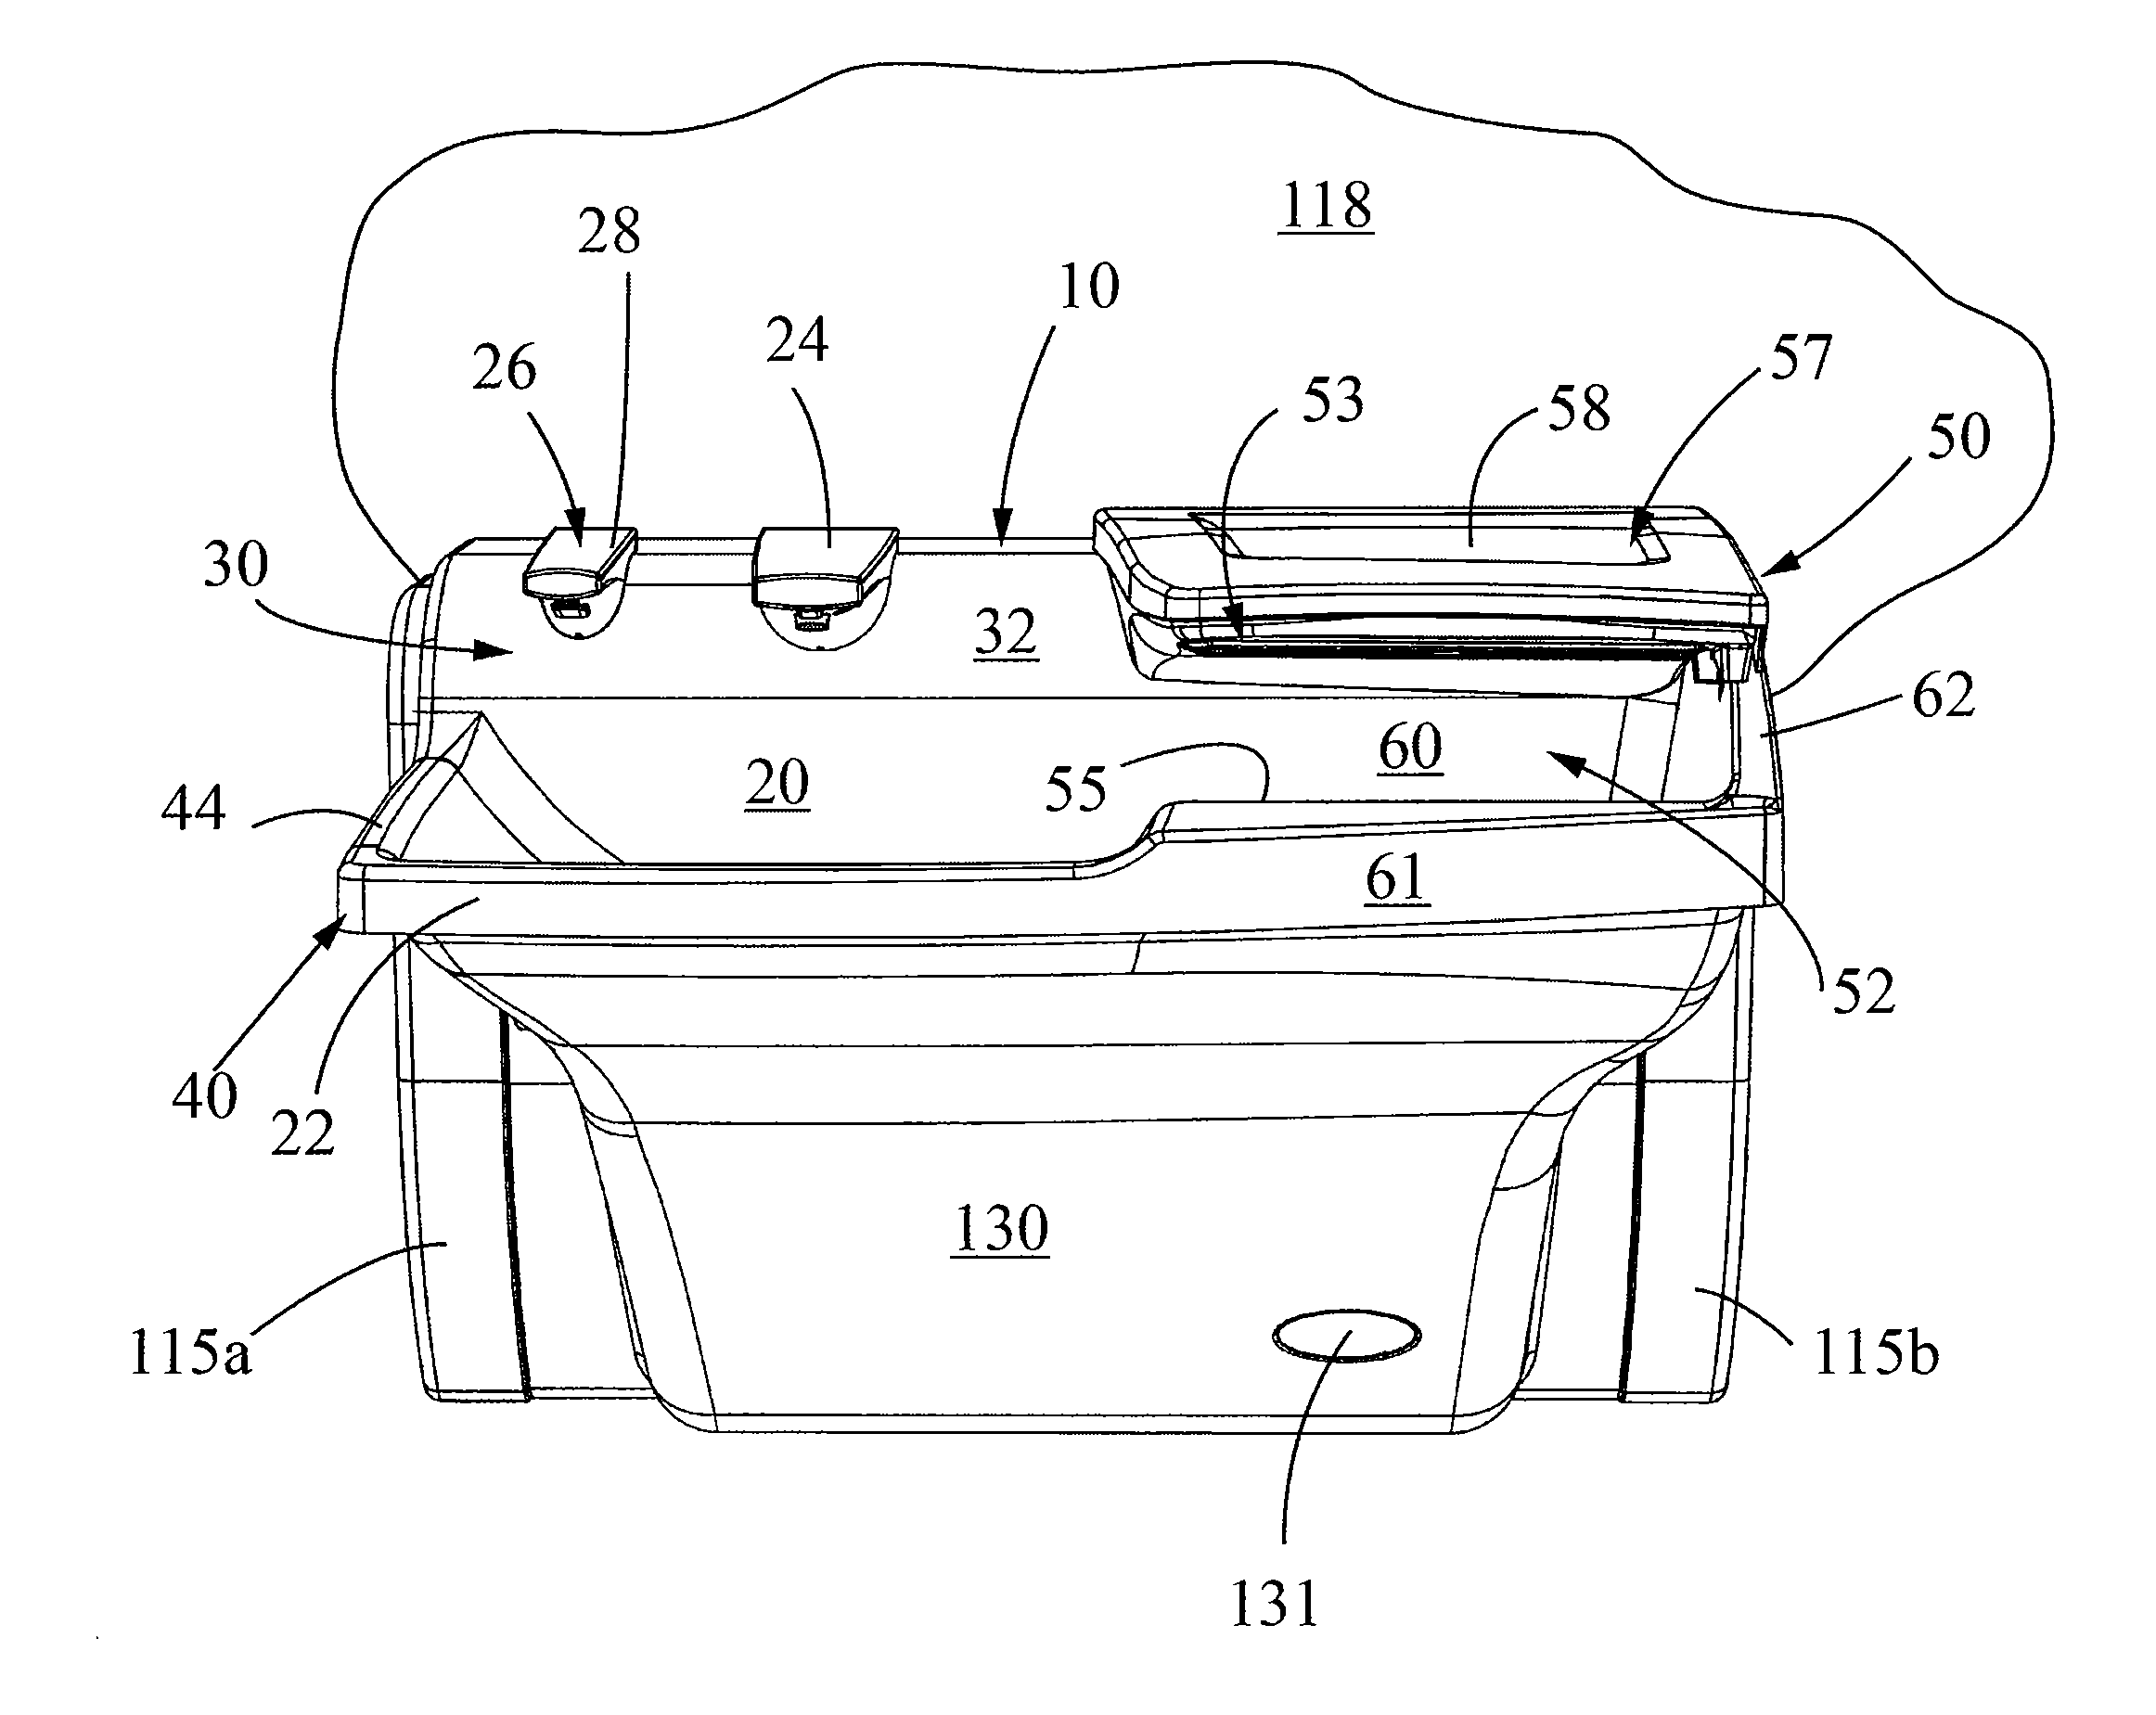 Lavatory System with Overflow Prevention and Other Features